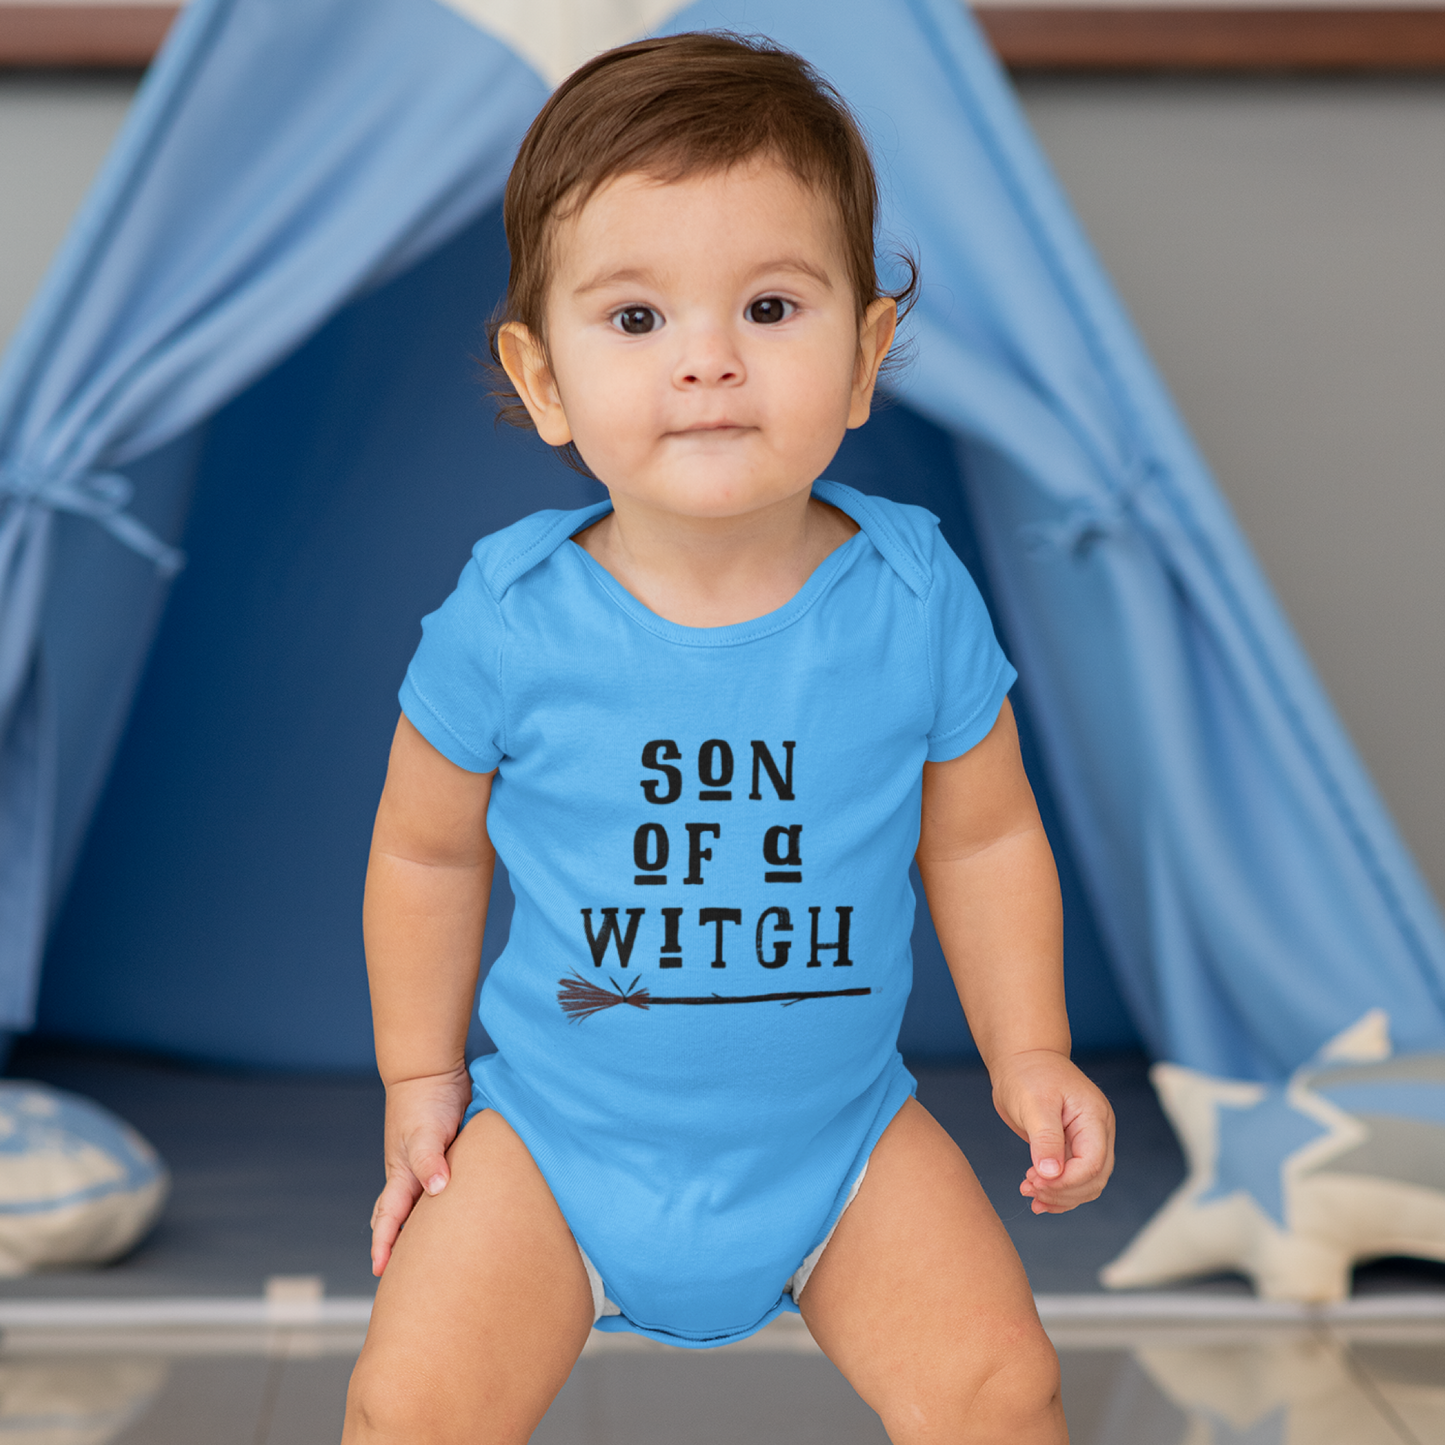 SON OF A WITCH SPOOKY BABY ONESIE® - BAT BABIES